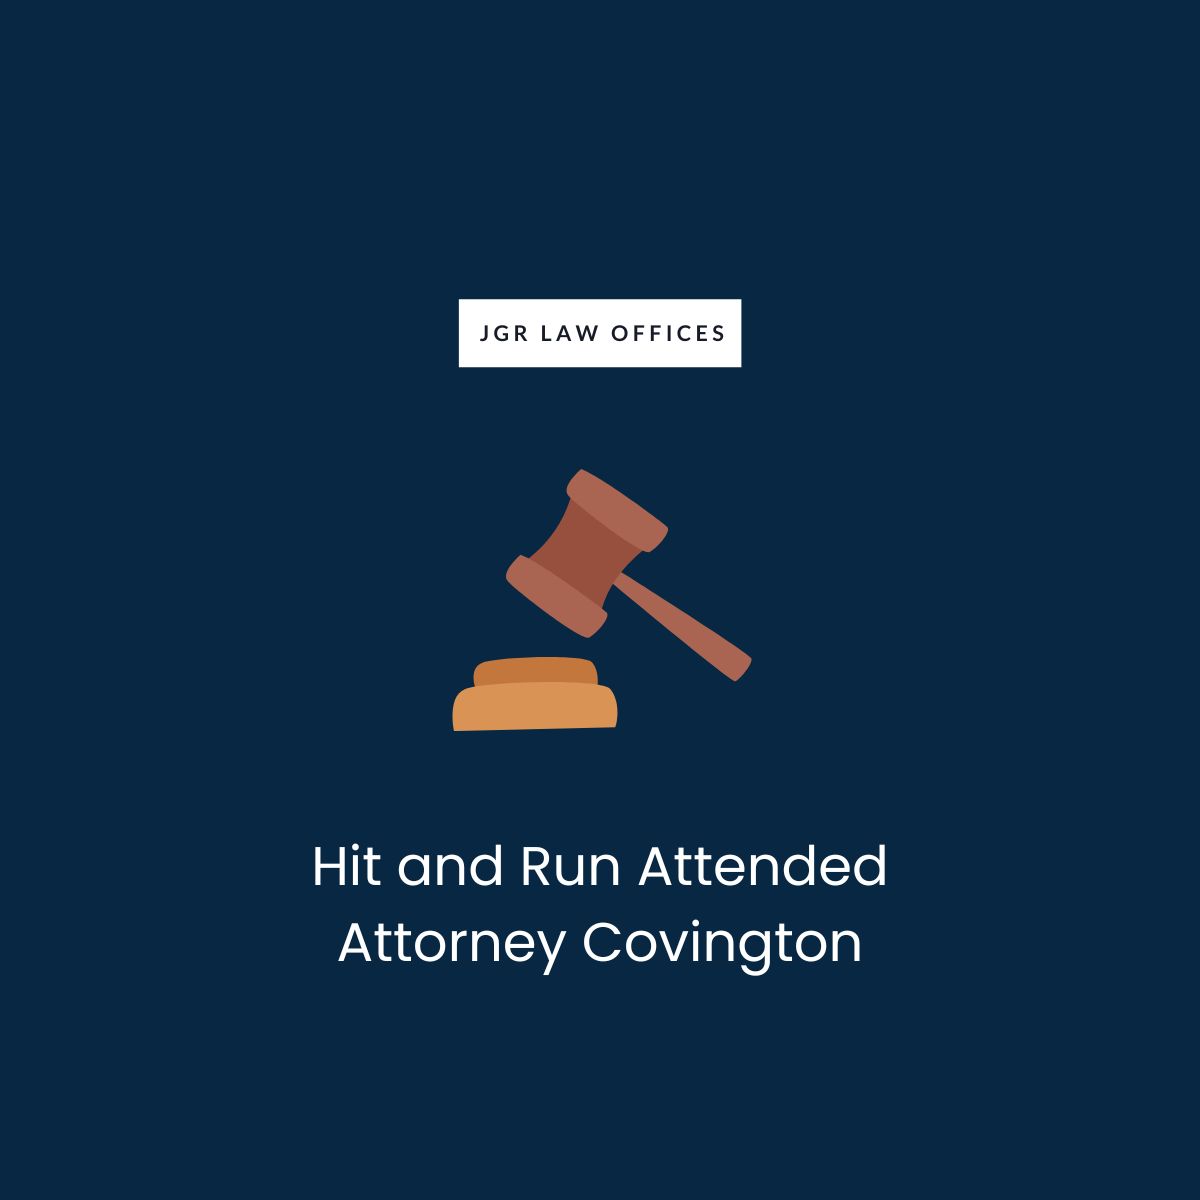 Hit and Run Attended Attorney Covington